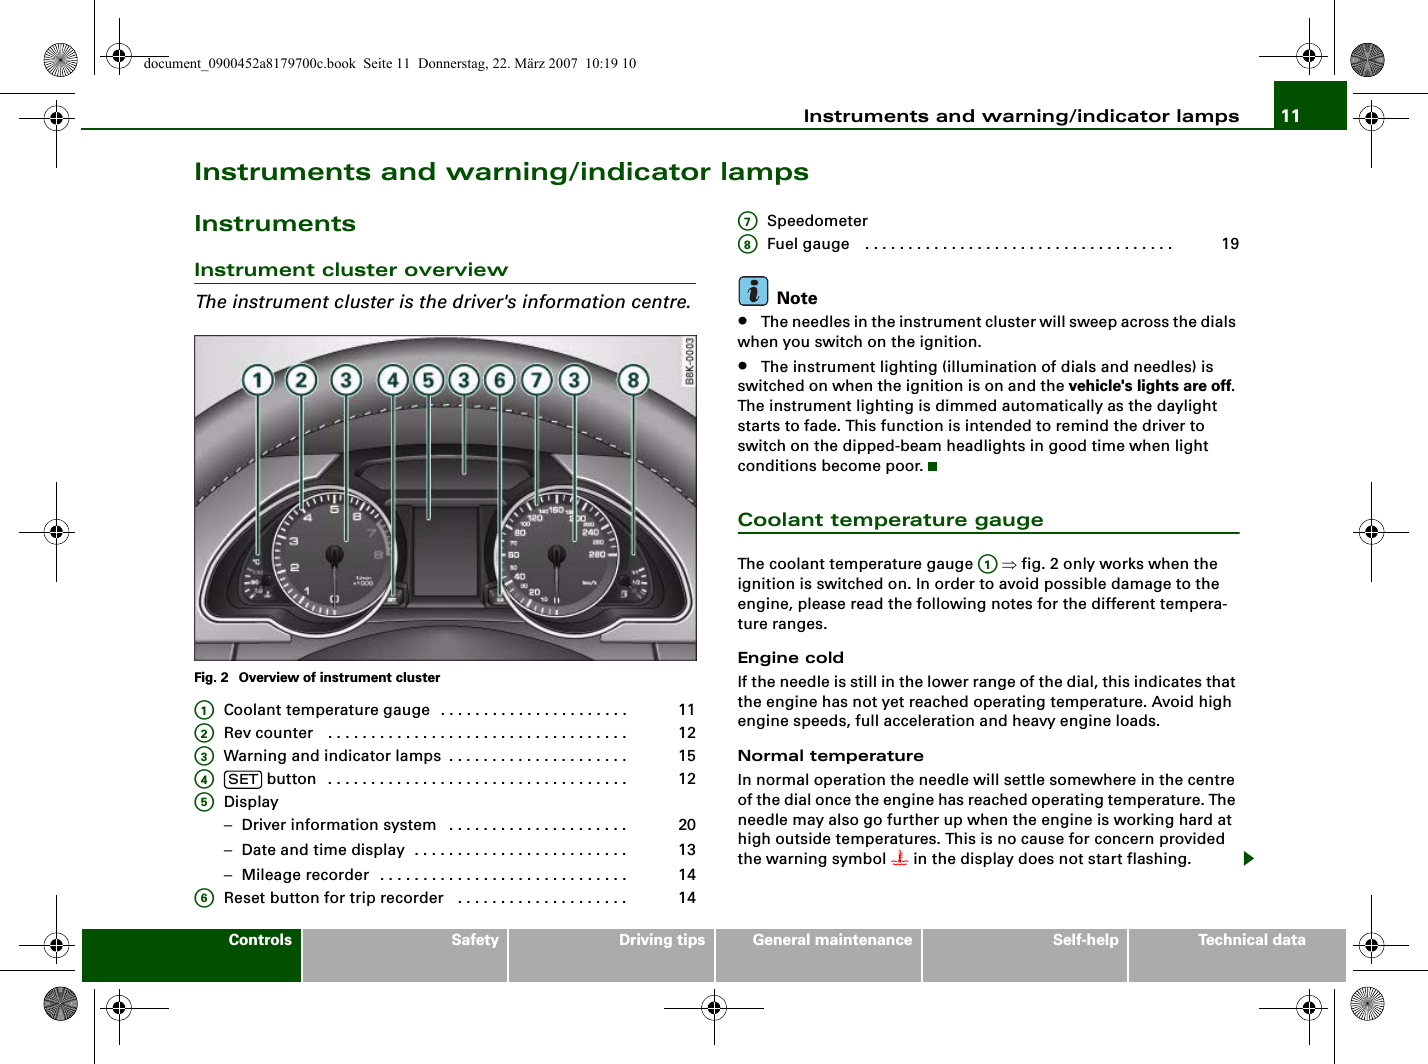 Instruments and warning/indicator lamps 11Controls Safety Driving tips General maintenance Self-help Technical dataInstruments and warning/indicator lampsInstrumentsInstrument cluster overviewThe instrument cluster is the driver&apos;s information centre.Fig. 2  Overview of instrument clusterCoolant temperature gauge . . . . . . . . . . . . . . . . . . . . . . Rev counter  . . . . . . . . . . . . . . . . . . . . . . . . . . . . . . . . . . . Warning and indicator lamps . . . . . . . . . . . . . . . . . . . . .  button . . . . . . . . . . . . . . . . . . . . . . . . . . . . . . . . . . . Display−Driver information system  . . . . . . . . . . . . . . . . . . . . . −Date and time display . . . . . . . . . . . . . . . . . . . . . . . . . −Mileage recorder . . . . . . . . . . . . . . . . . . . . . . . . . . . . . Reset button for trip recorder  . . . . . . . . . . . . . . . . . . . . SpeedometerFuel gauge  . . . . . . . . . . . . . . . . . . . . . . . . . . . . . . . . . . . .Note•The needles in the instrument cluster will sweep across the dials when you switch on the ignition.•The instrument lighting (illumination of dials and needles) is switched on when the ignition is on and the vehicle&apos;s lights are off. The instrument lighting is dimmed automatically as the daylight starts to fade. This function is intended to remind the driver to switch on the dipped-beam headlights in good time when light conditions become poor.Coolant temperature gaugeThe coolant temperature gauge   ⇒fig. 2 only works when the ignition is switched on. In order to avoid possible damage to the engine, please read the following notes for the different tempera-ture ranges.Engine coldIf the needle is still in the lower range of the dial, this indicates that the engine has not yet reached operating temperature. Avoid high engine speeds, full acceleration and heavy engine loads.Normal temperatureIn normal operation the needle will settle somewhere in the centre of the dial once the engine has reached operating temperature. The needle may also go further up when the engine is working hard at high outside temperatures. This is no cause for concern provided the warning symbol  in the display does not start flashing.A111A212A315A4SET 12A5201314A614A7A819A1document_0900452a8179700c.book  Seite 11  Donnerstag, 22. März 2007  10:19 10